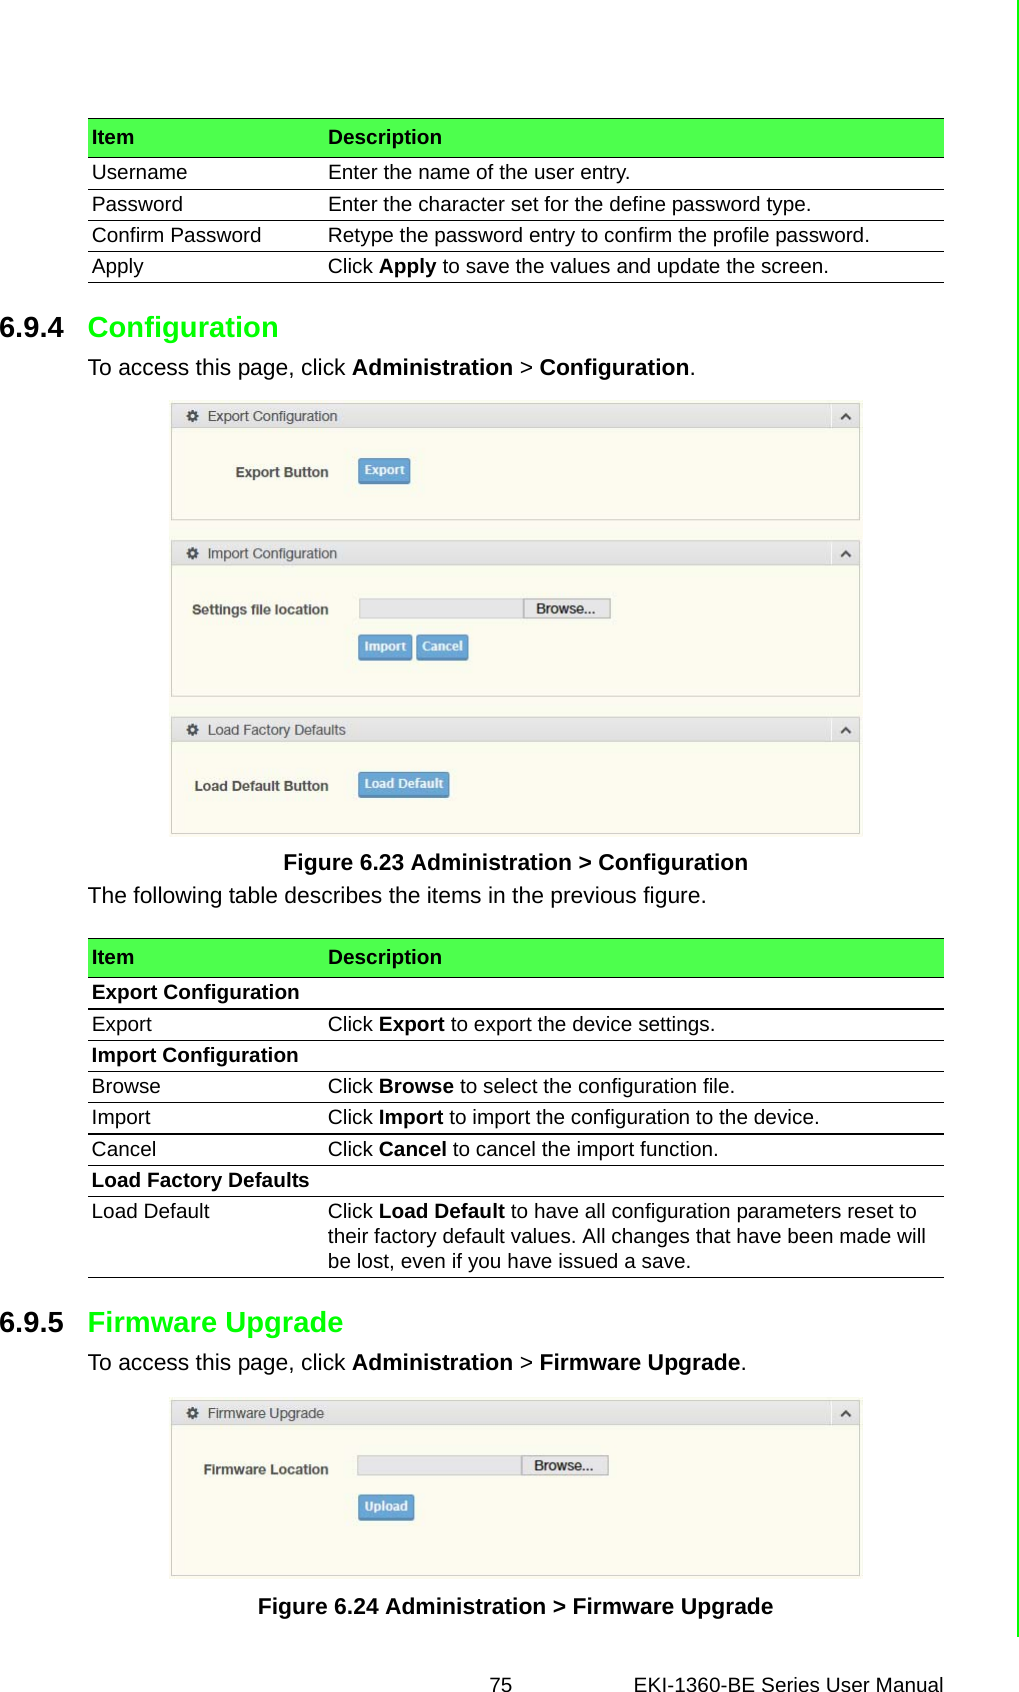 75 EKI-1360-BE Series User Manual 6.9.4 ConfigurationTo access this page, click Administration &gt; Configuration.Figure 6.23 Administration &gt; ConfigurationThe following table describes the items in the previous figure.6.9.5 Firmware UpgradeTo access this page, click Administration &gt; Firmware Upgrade.Figure 6.24 Administration &gt; Firmware UpgradeUsername Enter the name of the user entry.Password Enter the character set for the define password type.Confirm Password Retype the password entry to confirm the profile password.Apply Click Apply to save the values and update the screen.Item DescriptionItem DescriptionExport ConfigurationExport Click Export to export the device settings.Import ConfigurationBrowse Click Browse to select the configuration file.Import Click Import to import the configuration to the device.Cancel Click Cancel to cancel the import function.Load Factory DefaultsLoad Default Click Load Default to have all configuration parameters reset to their factory default values. All changes that have been made will be lost, even if you have issued a save.